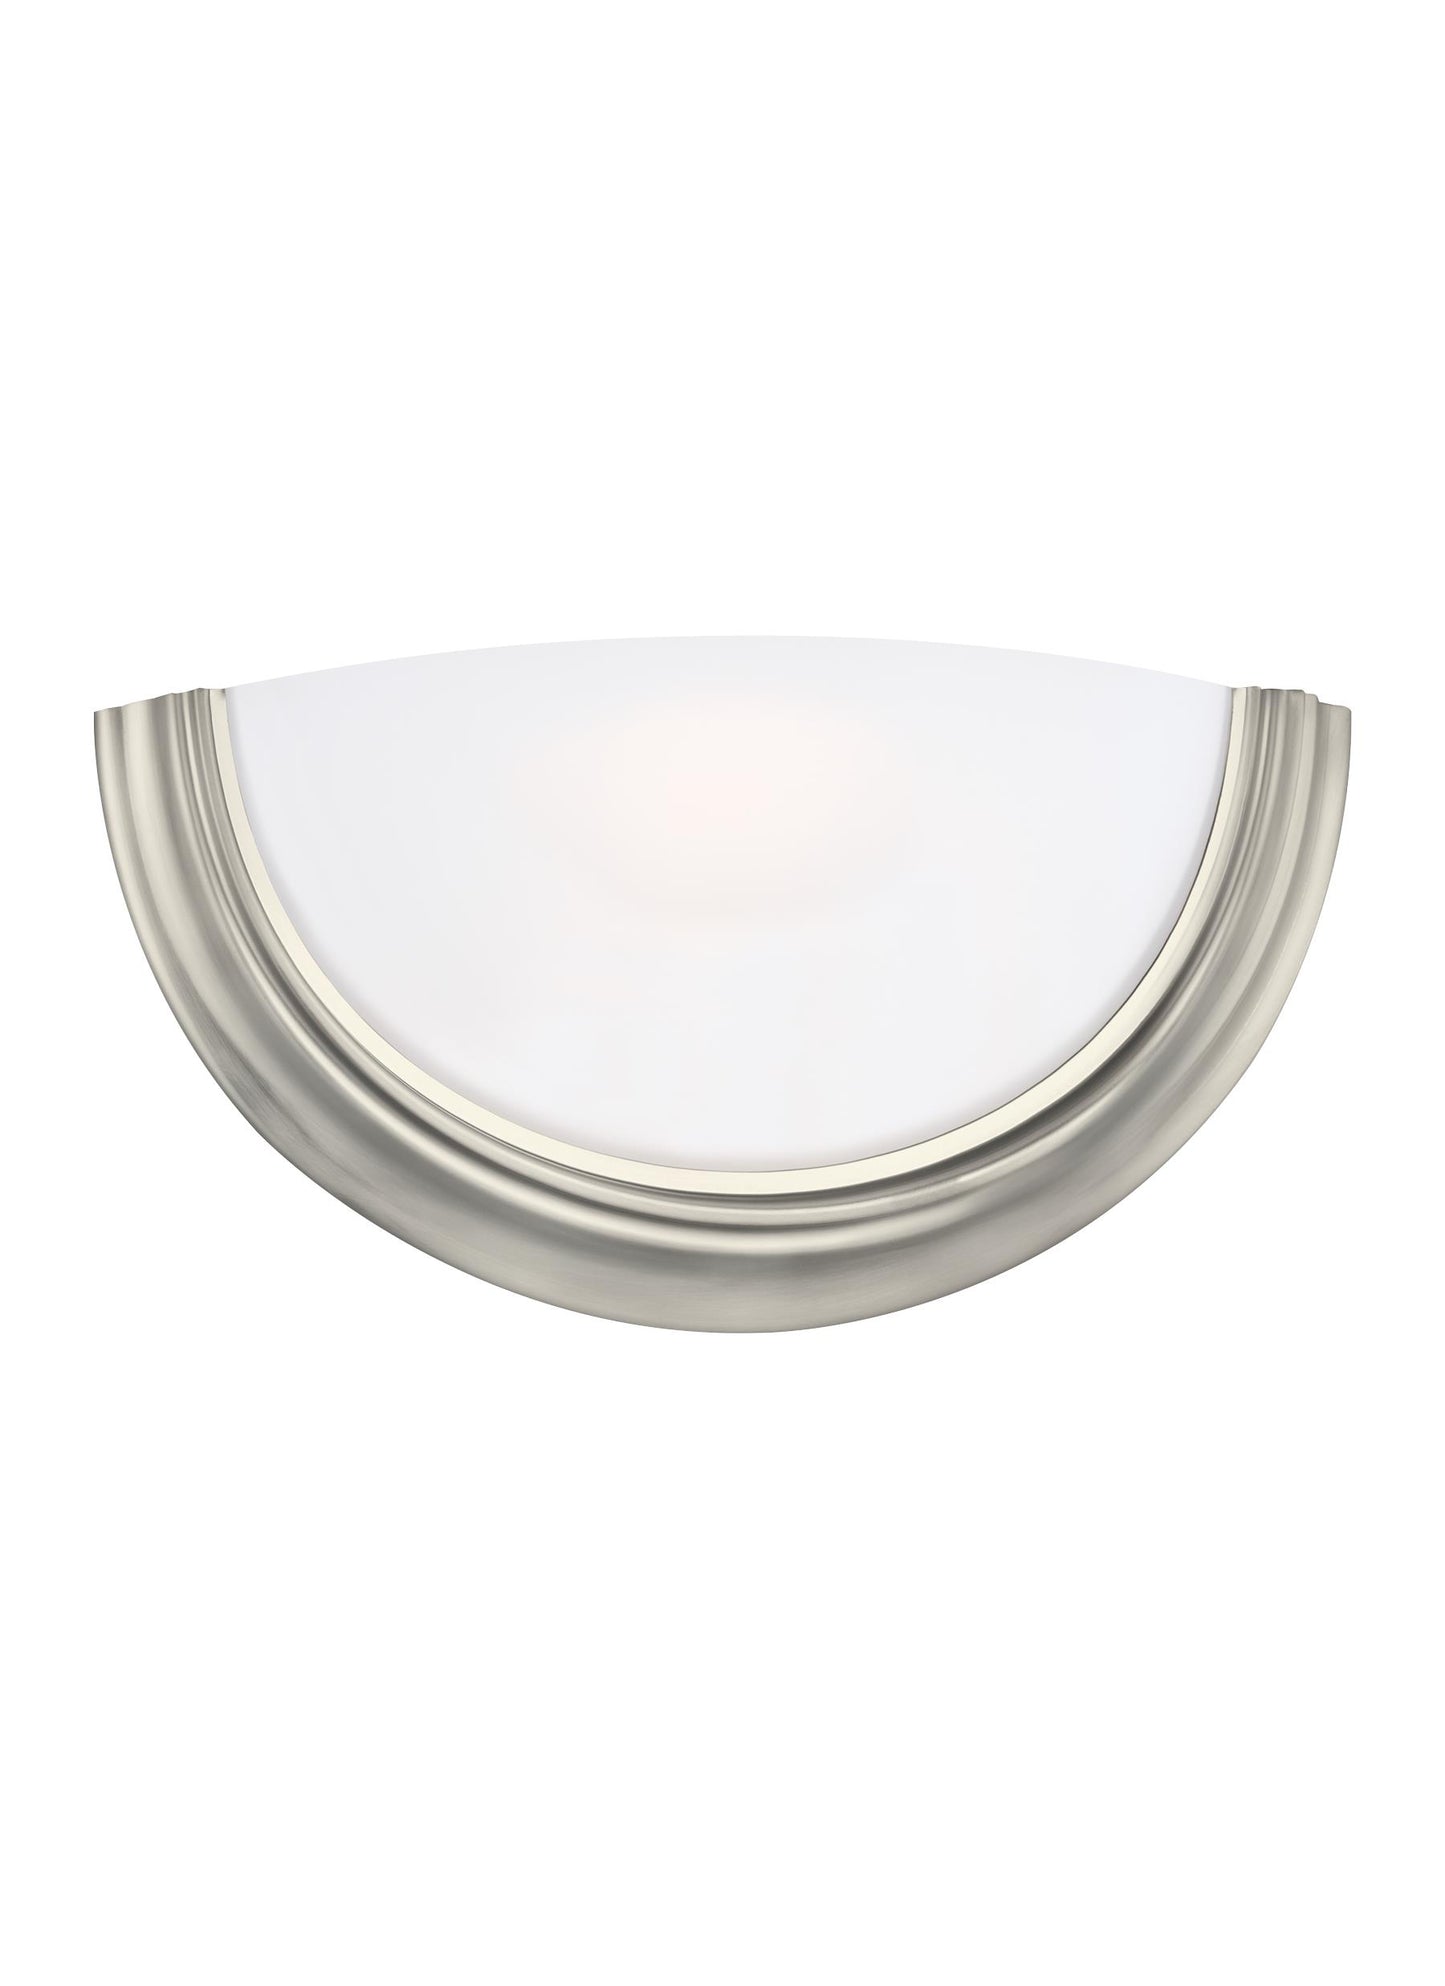 Alvy traditional 1-light LED indoor dimmable bath vanity wall sconce in brushed nickel silver finish with smooth white gla...